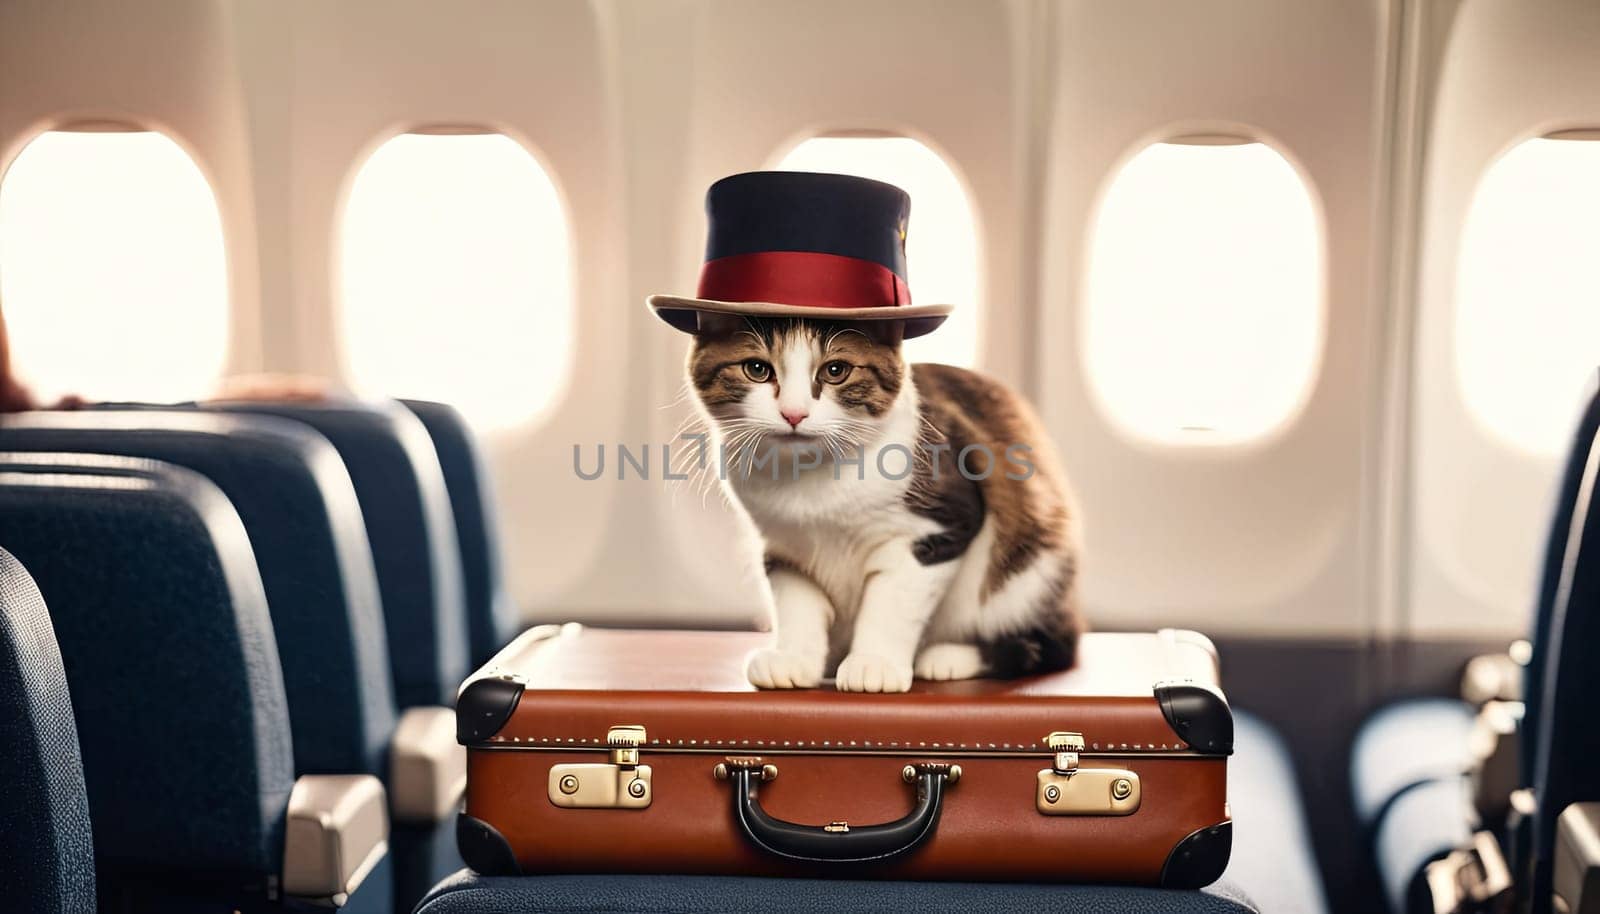 Traveler cat at airport, private jet awaits. Cat adorned with stylish hat sits atop suitcase, evoking sense of companionship in travel. by Matiunina